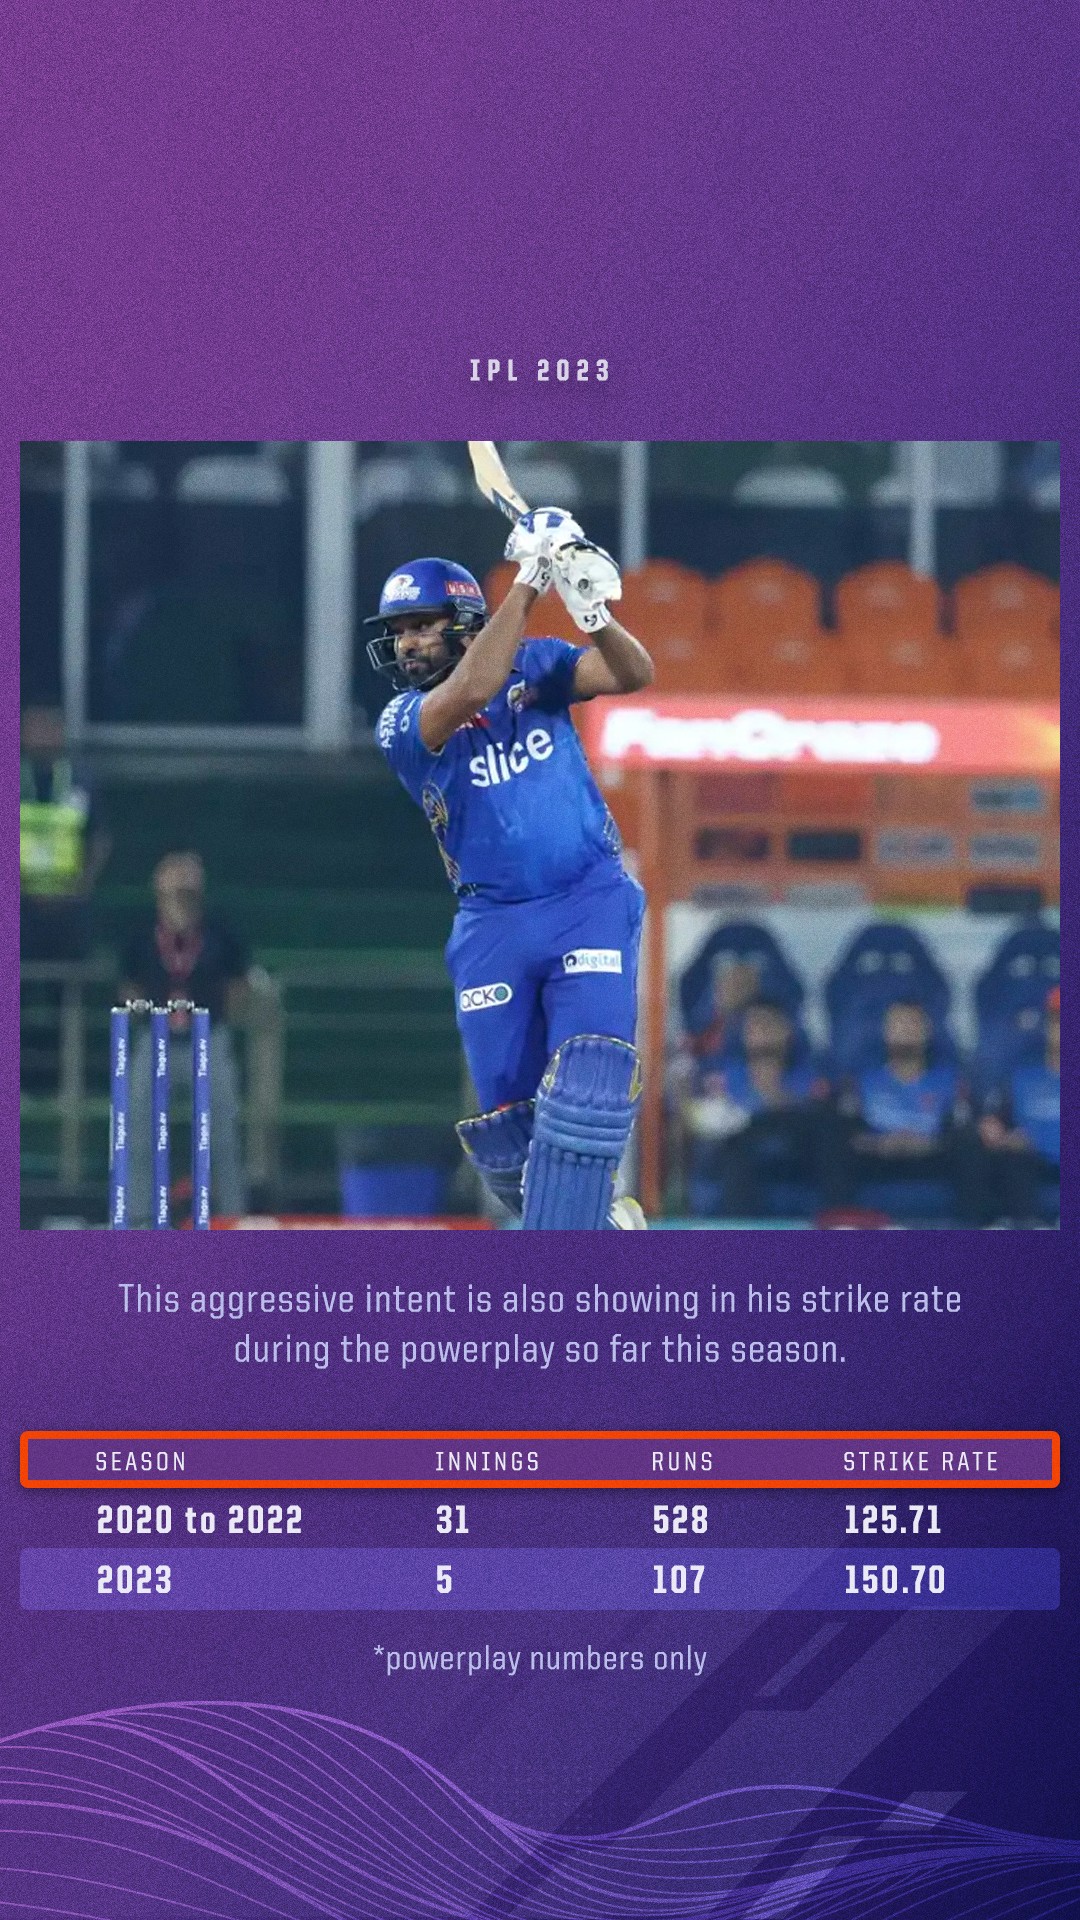 Rohit Sharma changes his powerplay approach